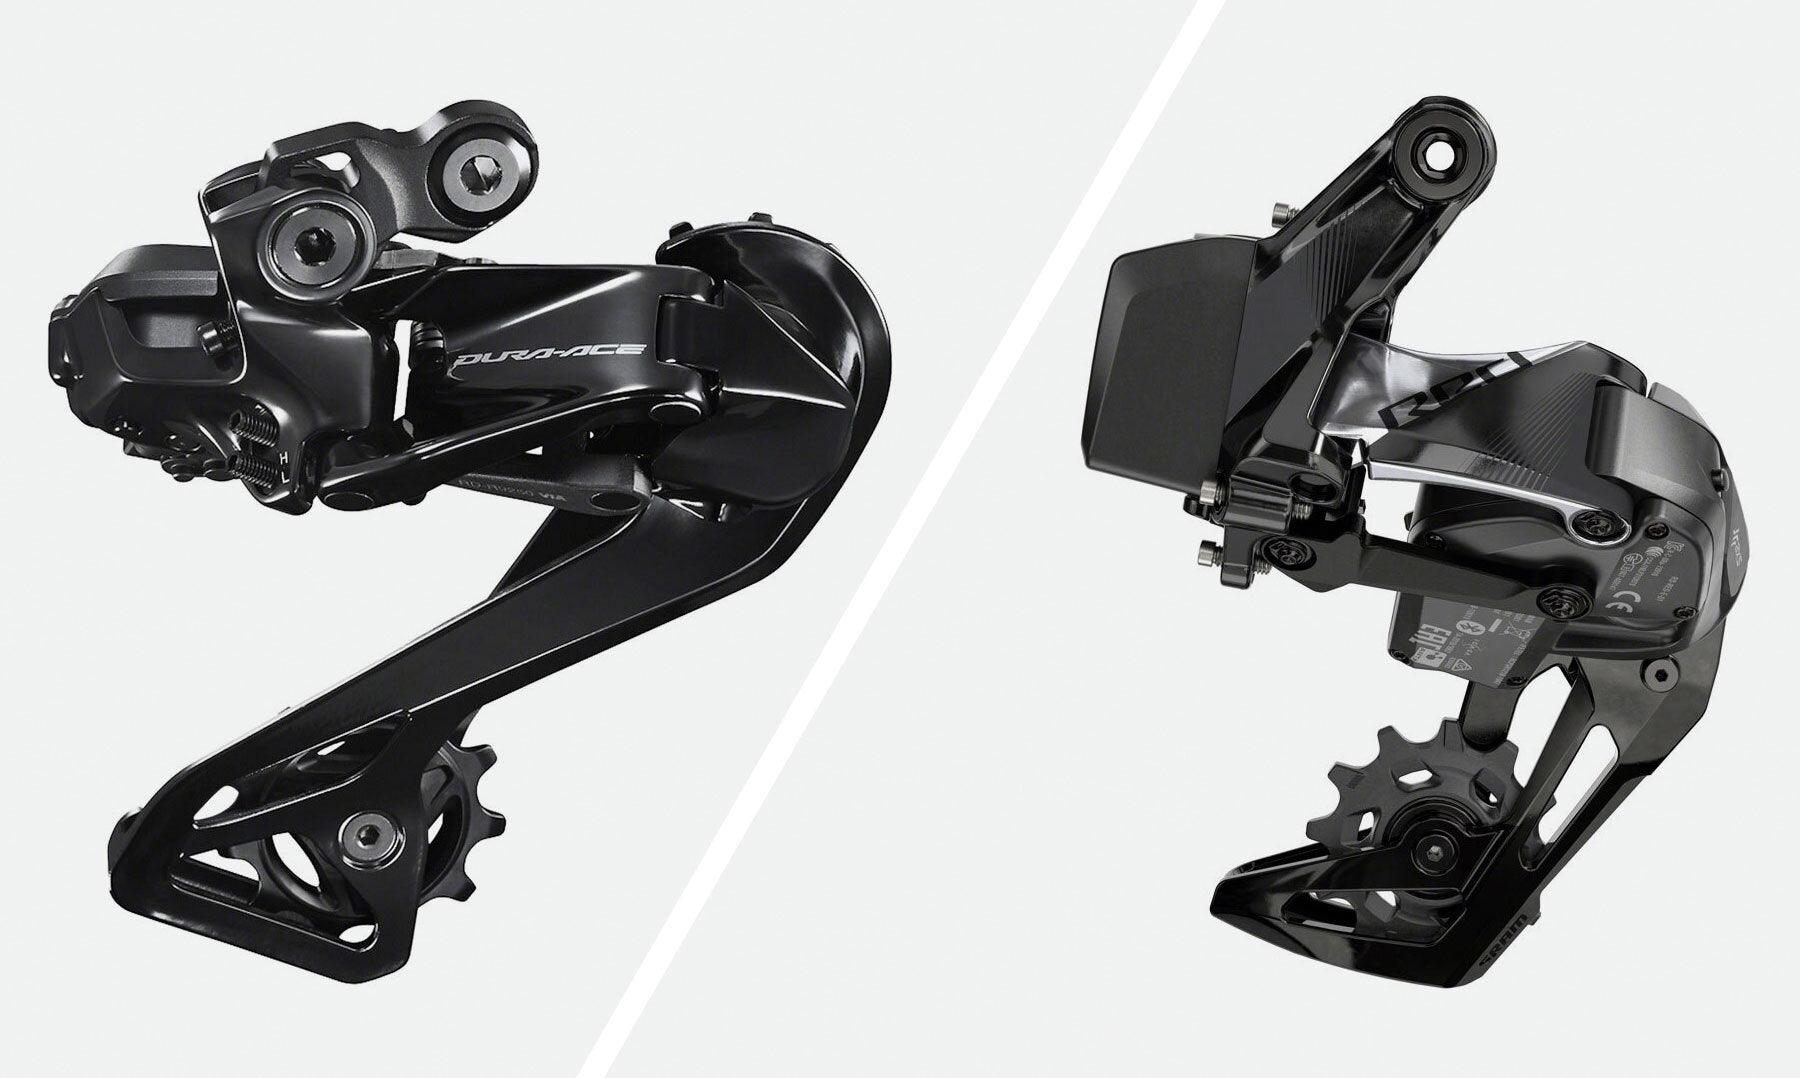 Shimano Di2 (Ultegra & others) vs. SRAM AXS: What's Better, Weight, Price Comparisons & | The Closet